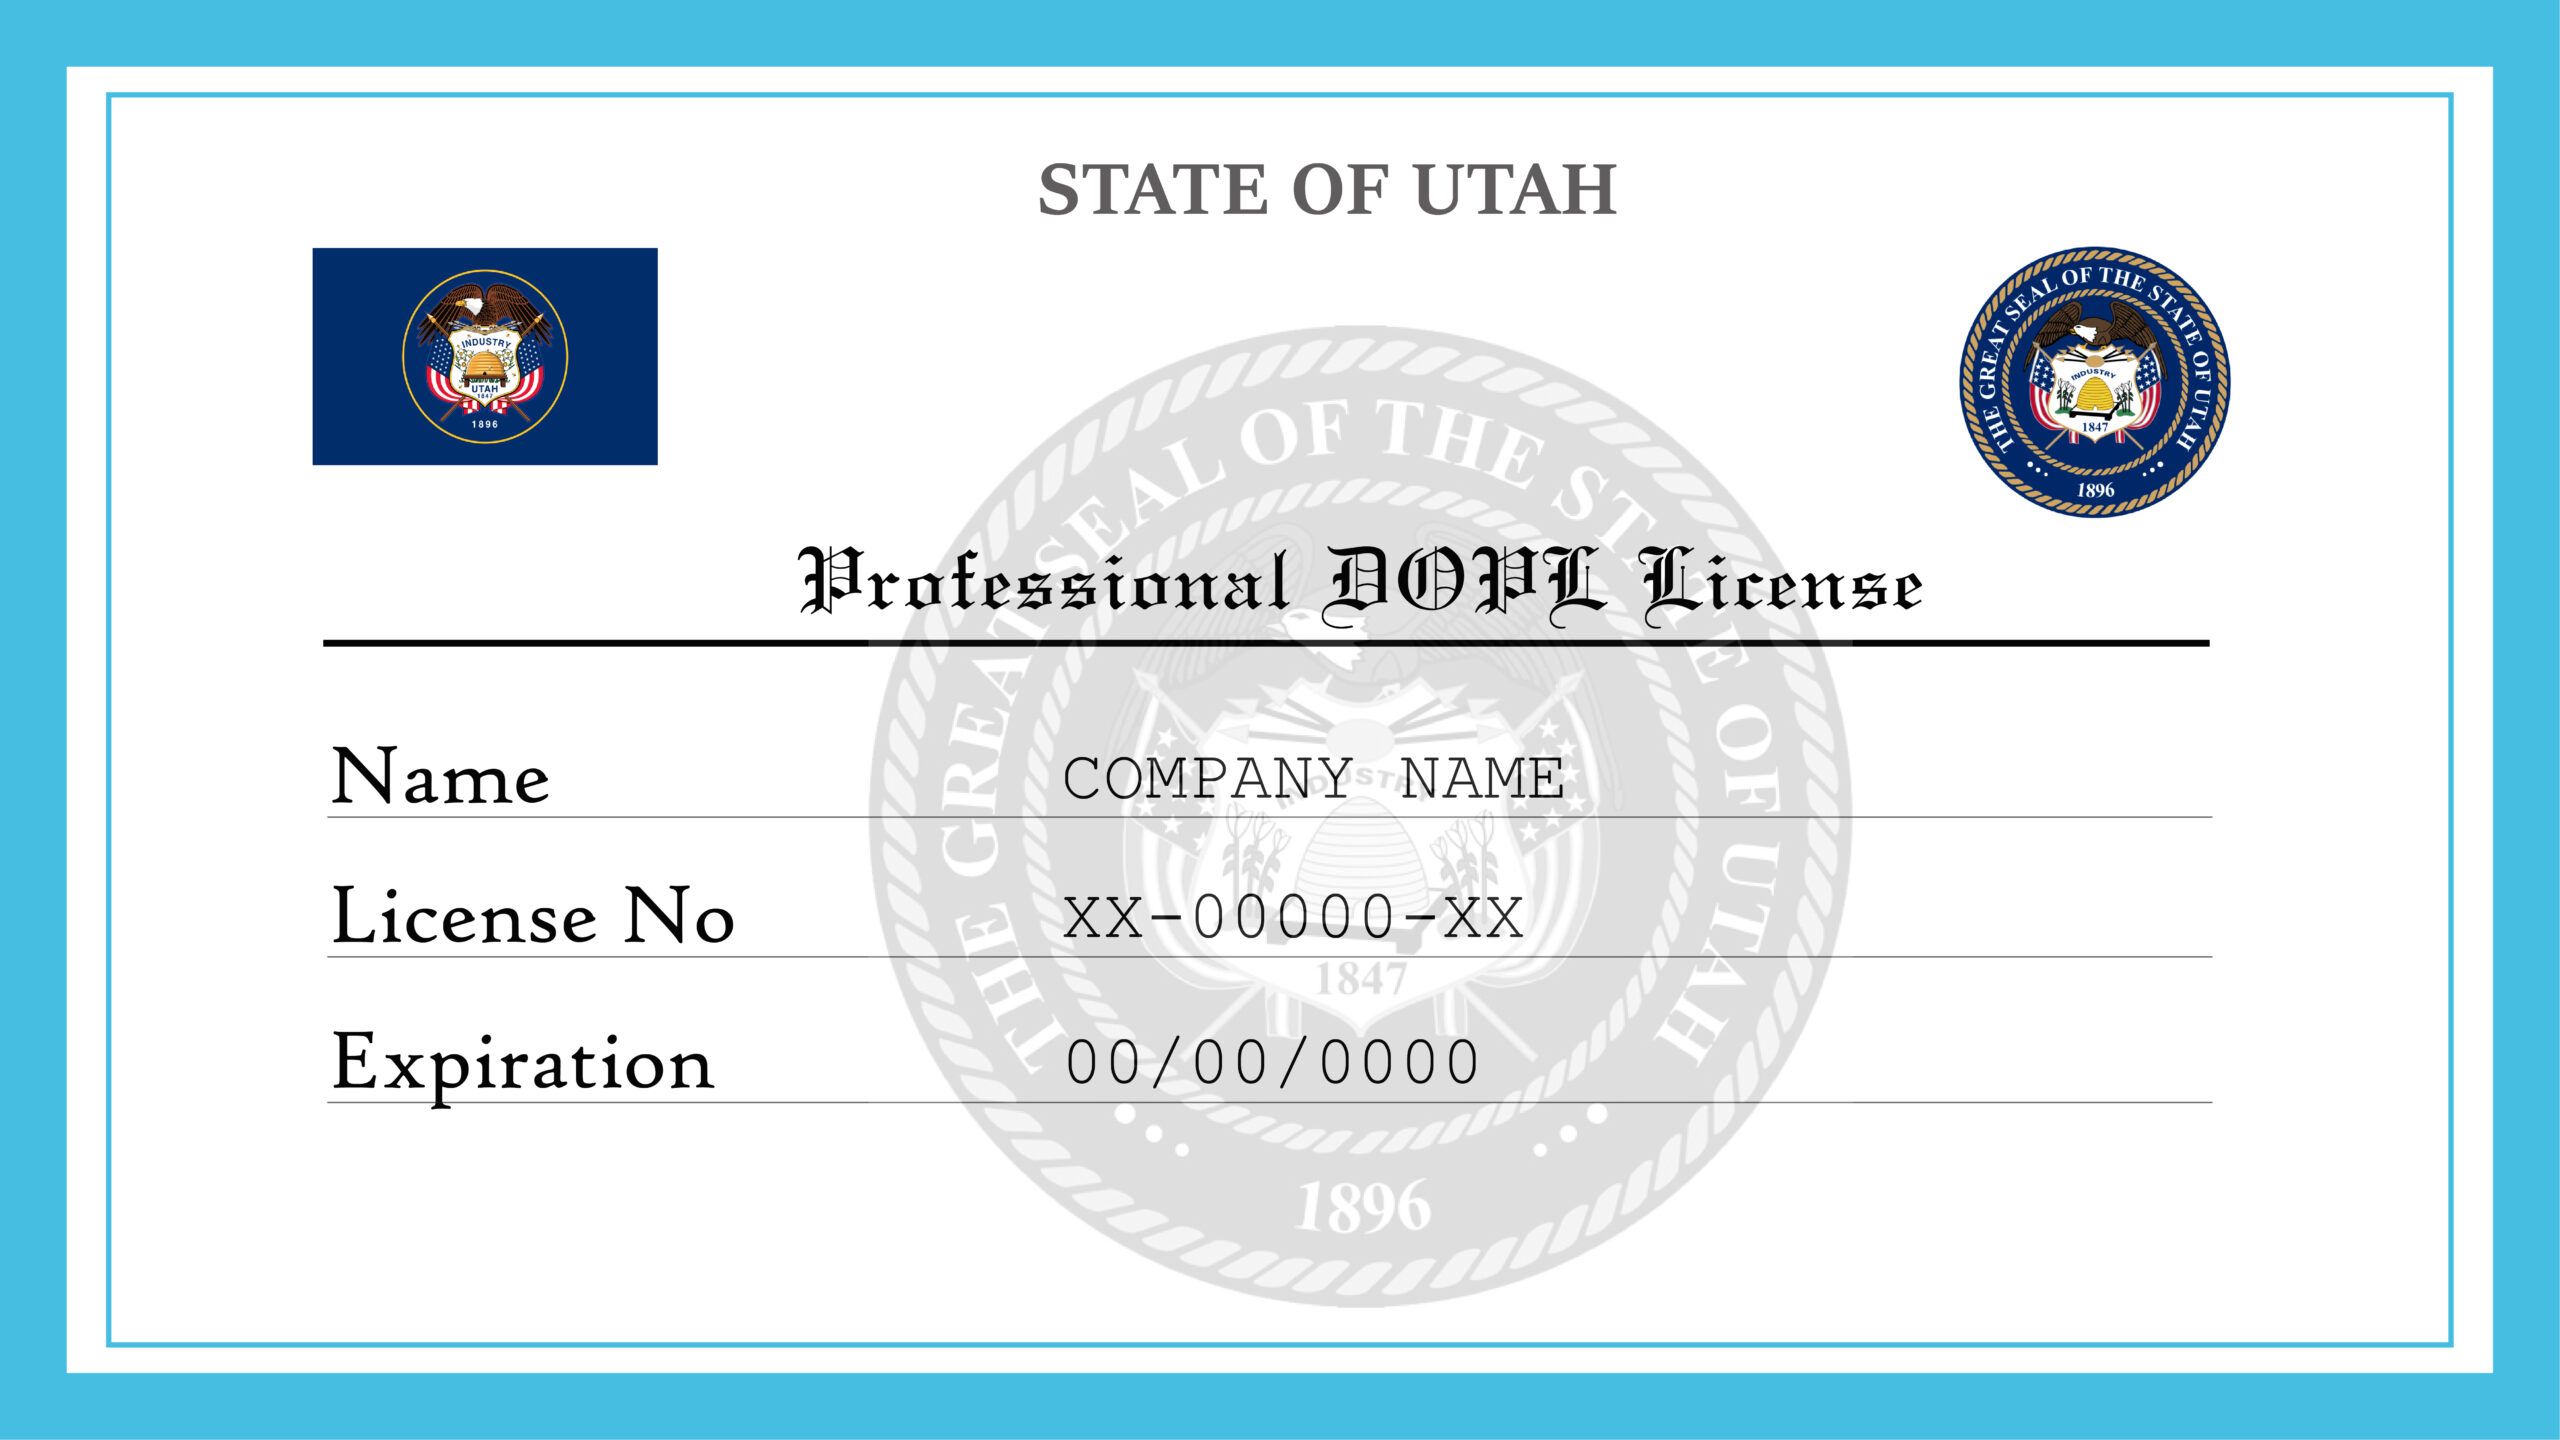 1. Utah Division of Occupational and Professional Licensing - wide 3